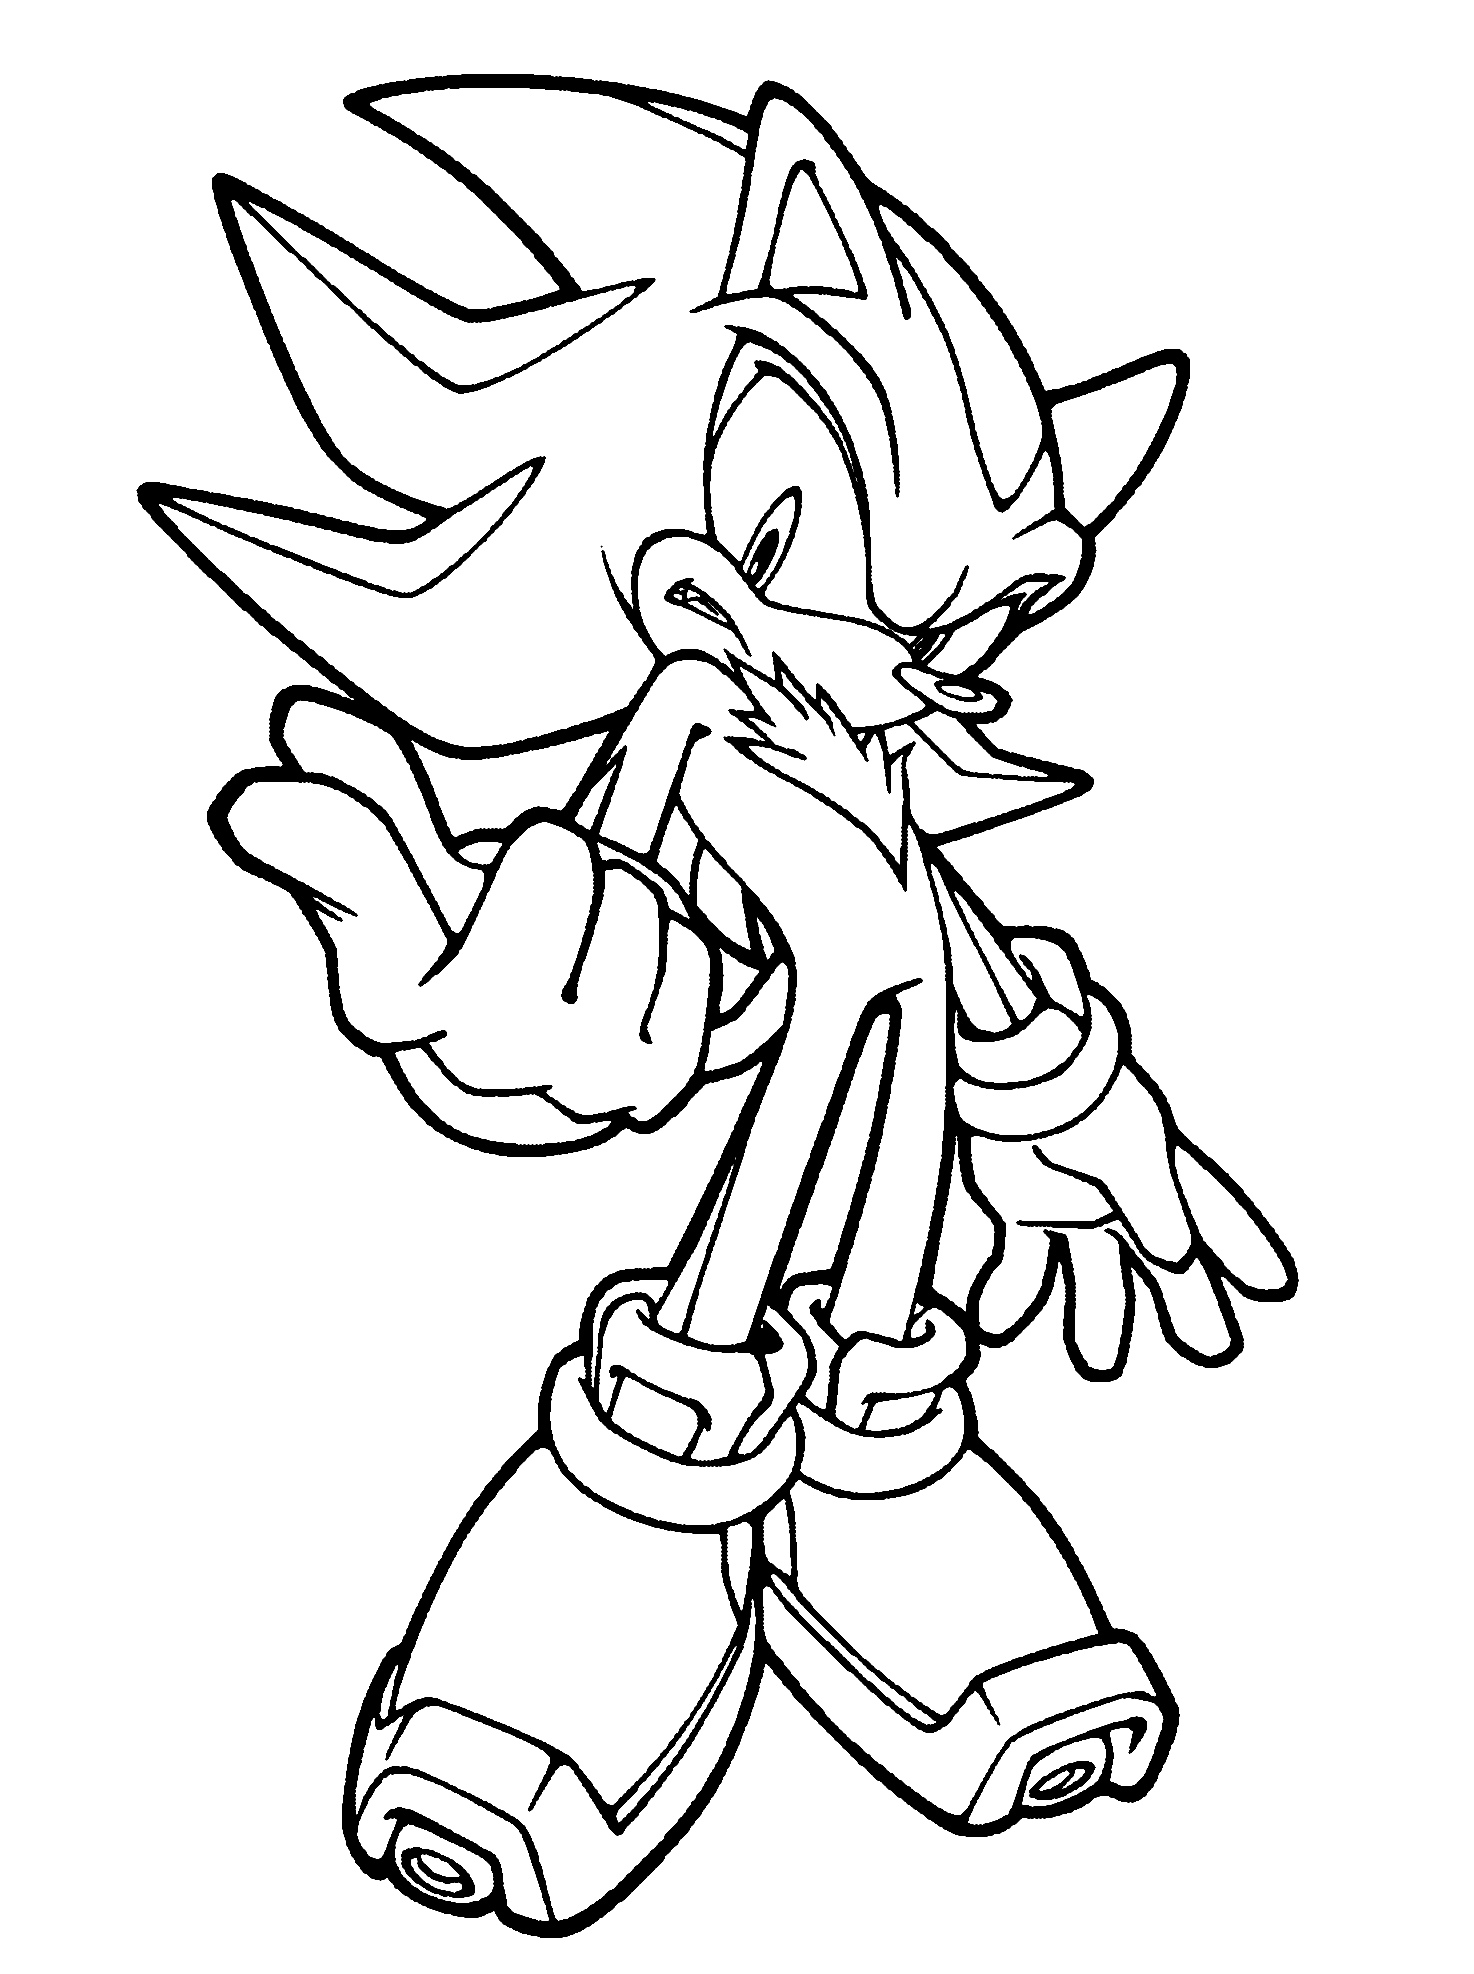 Shadow the hedgehog is confident coloring page